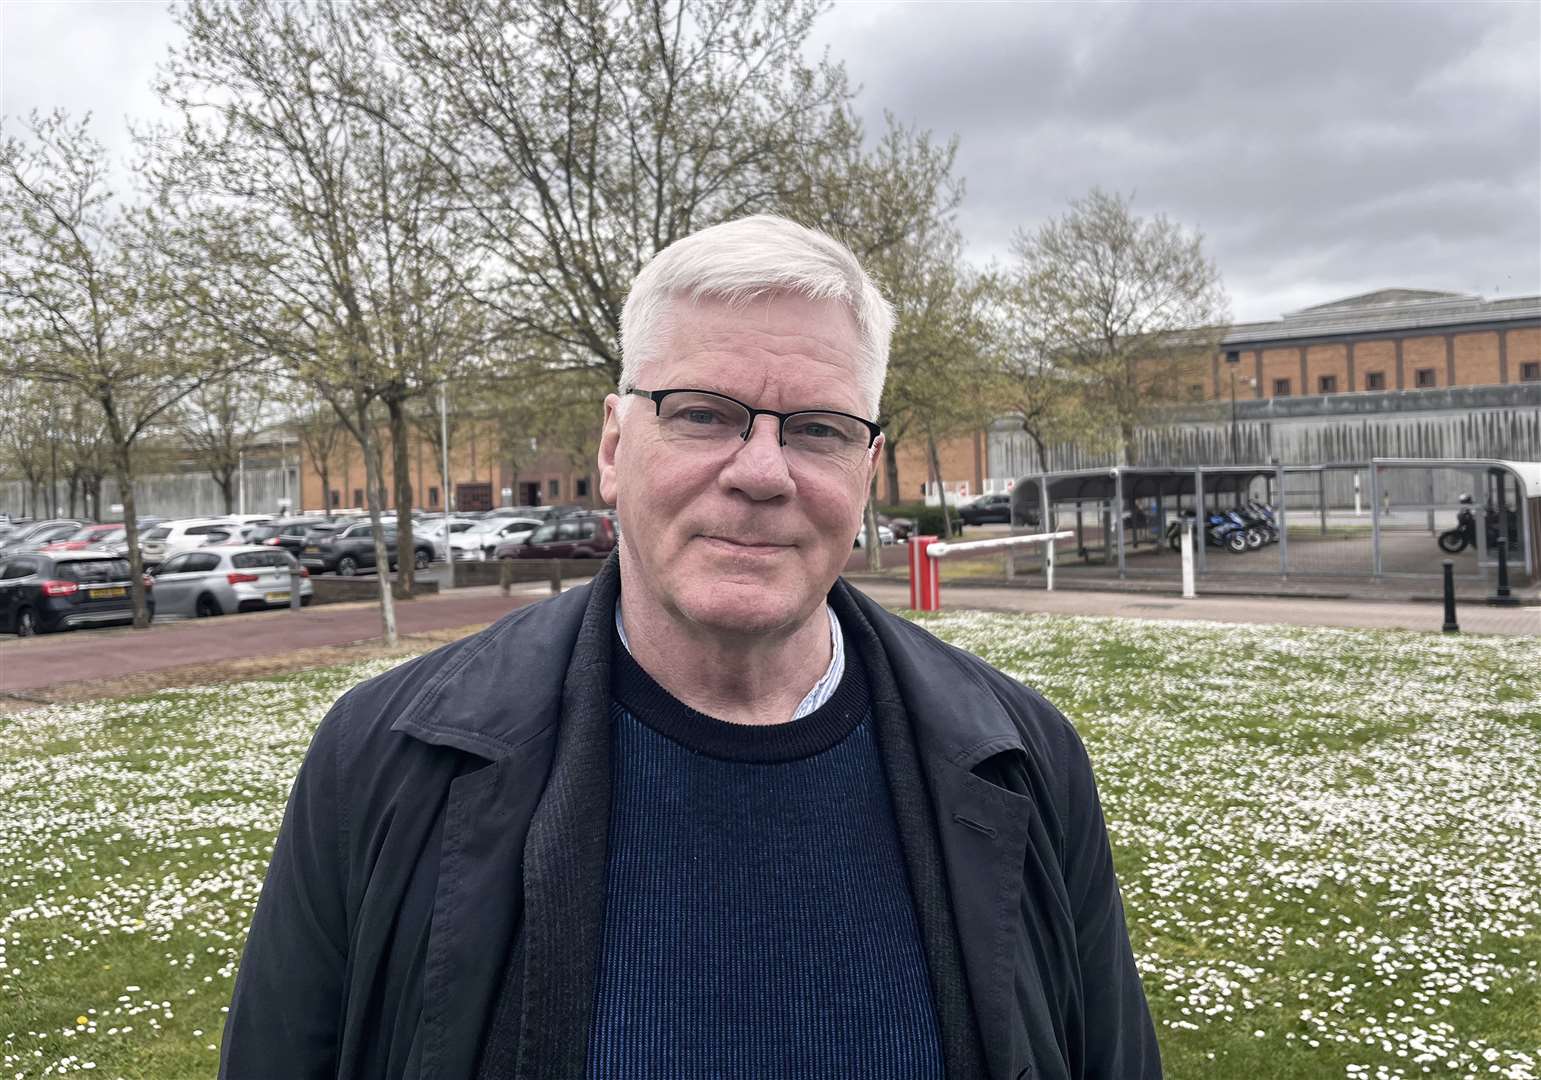 Kristinn Hrafnsson outside Belmarsh prison after speaking to Julian Assange, who has been imprisoned there for five years (Jamel Smith/PA)